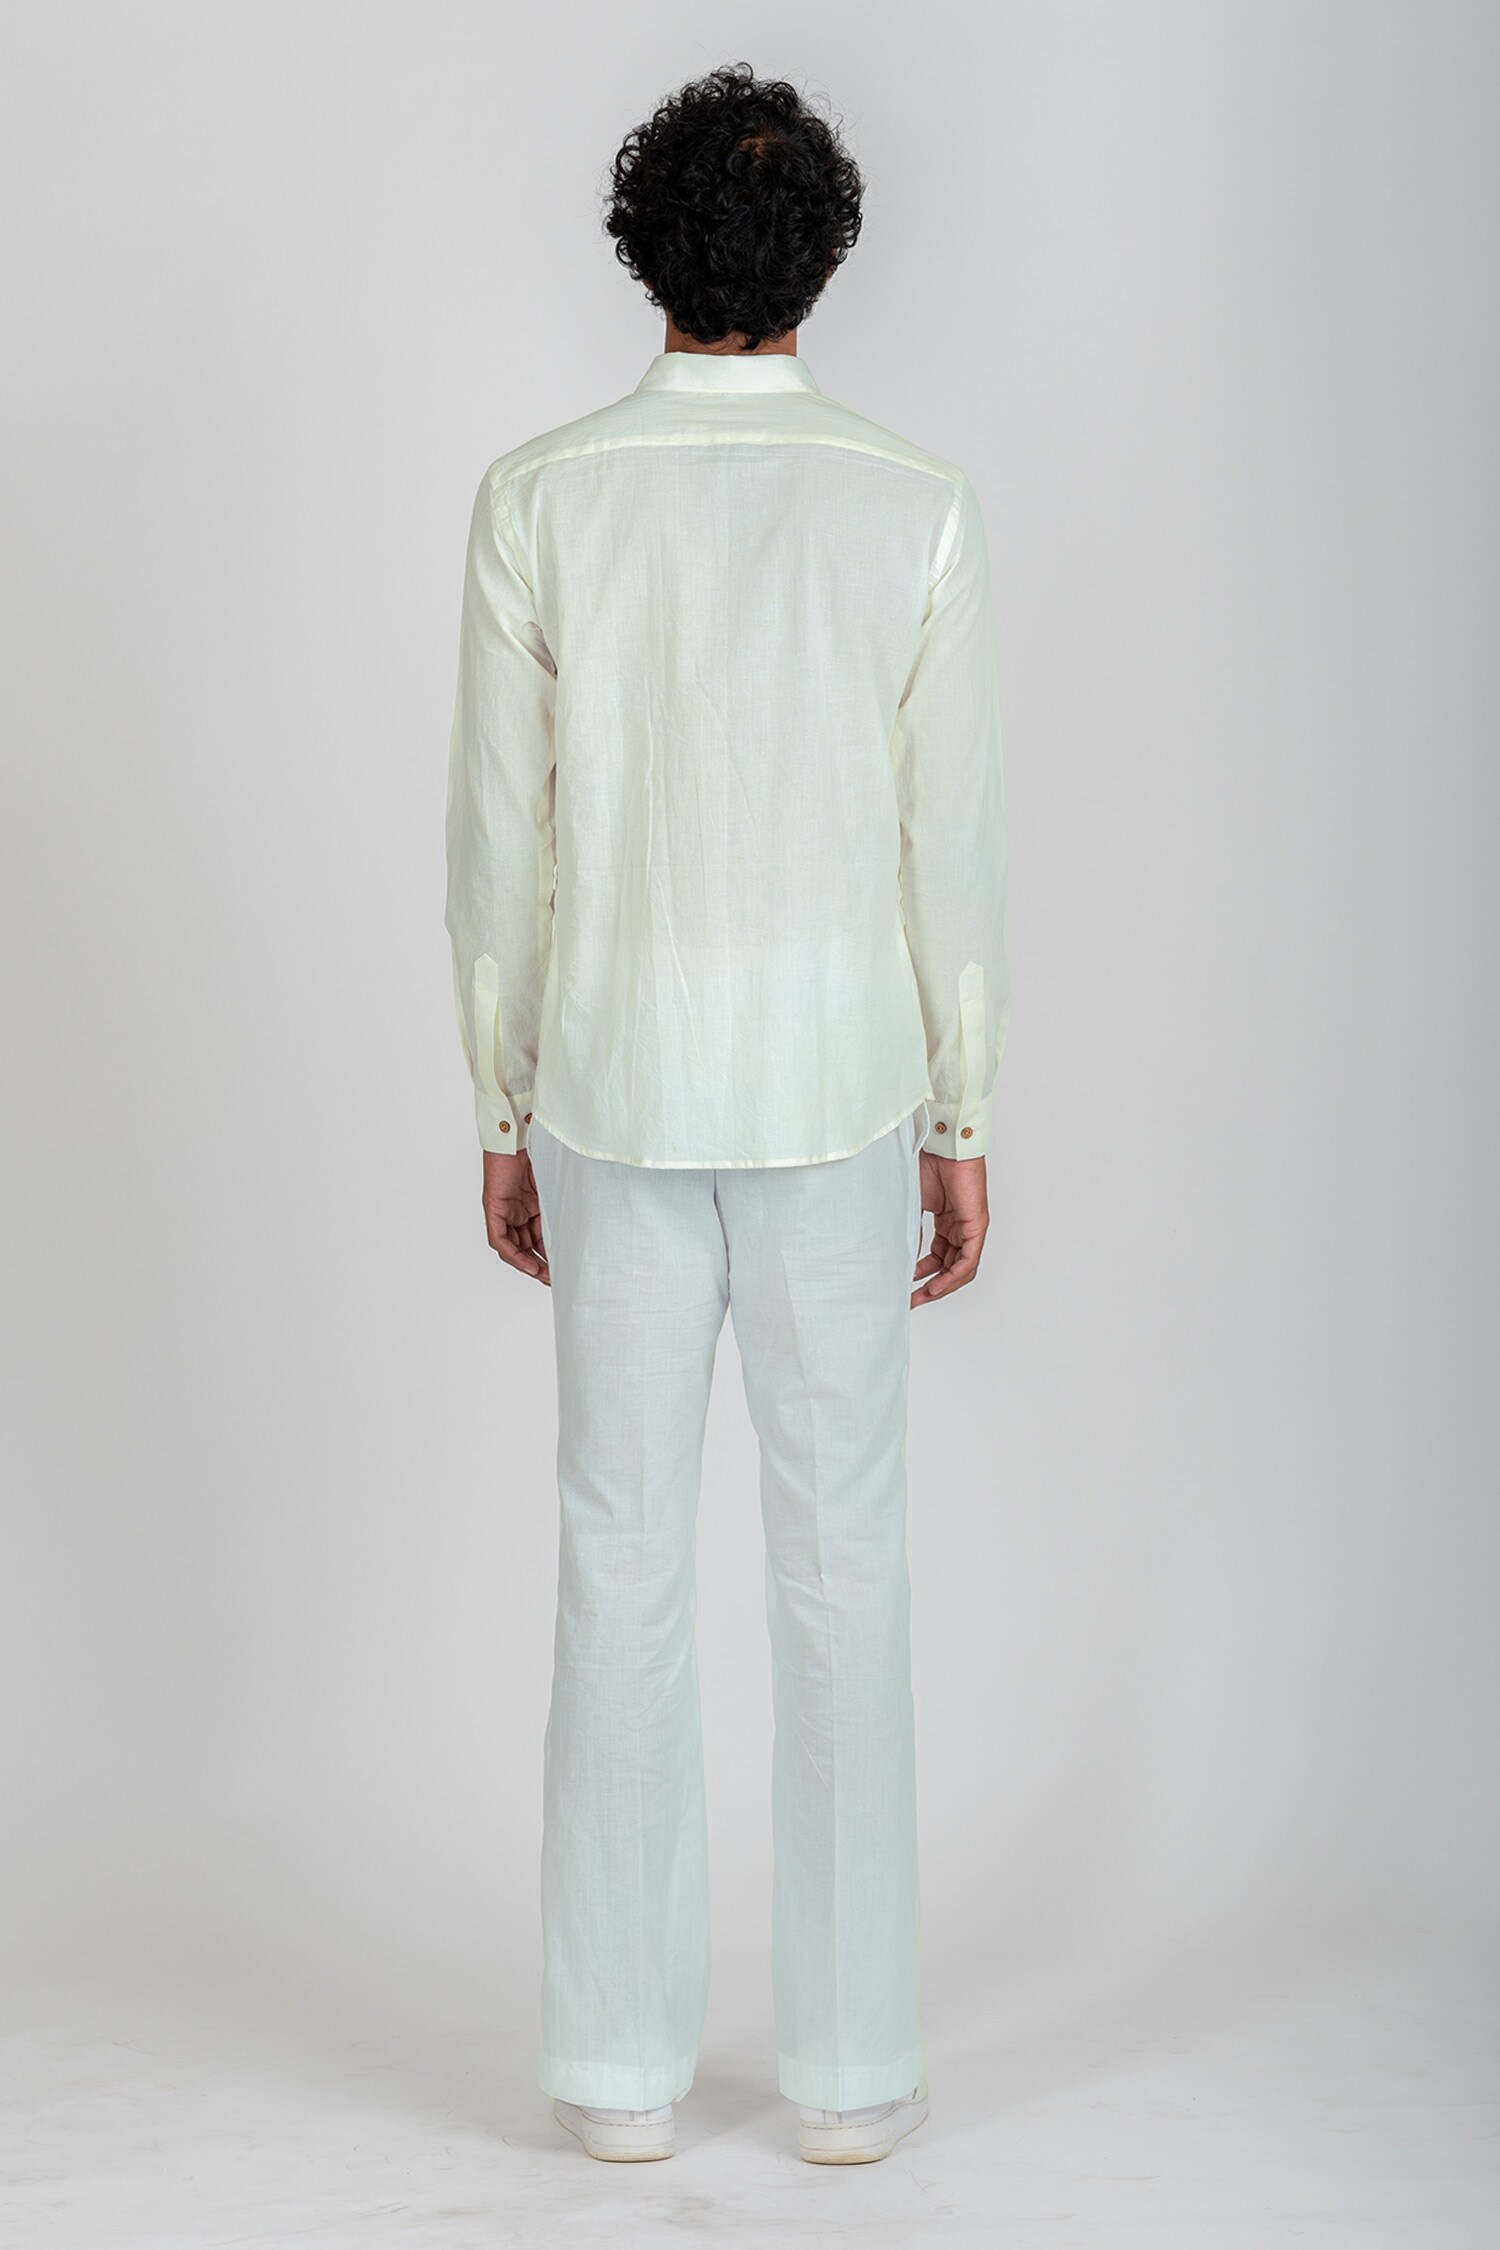 Textured White Cotton Blend Pocket Bell Bottom Pant, Waist Size: Free Size  at Rs 230/piece in New Delhi